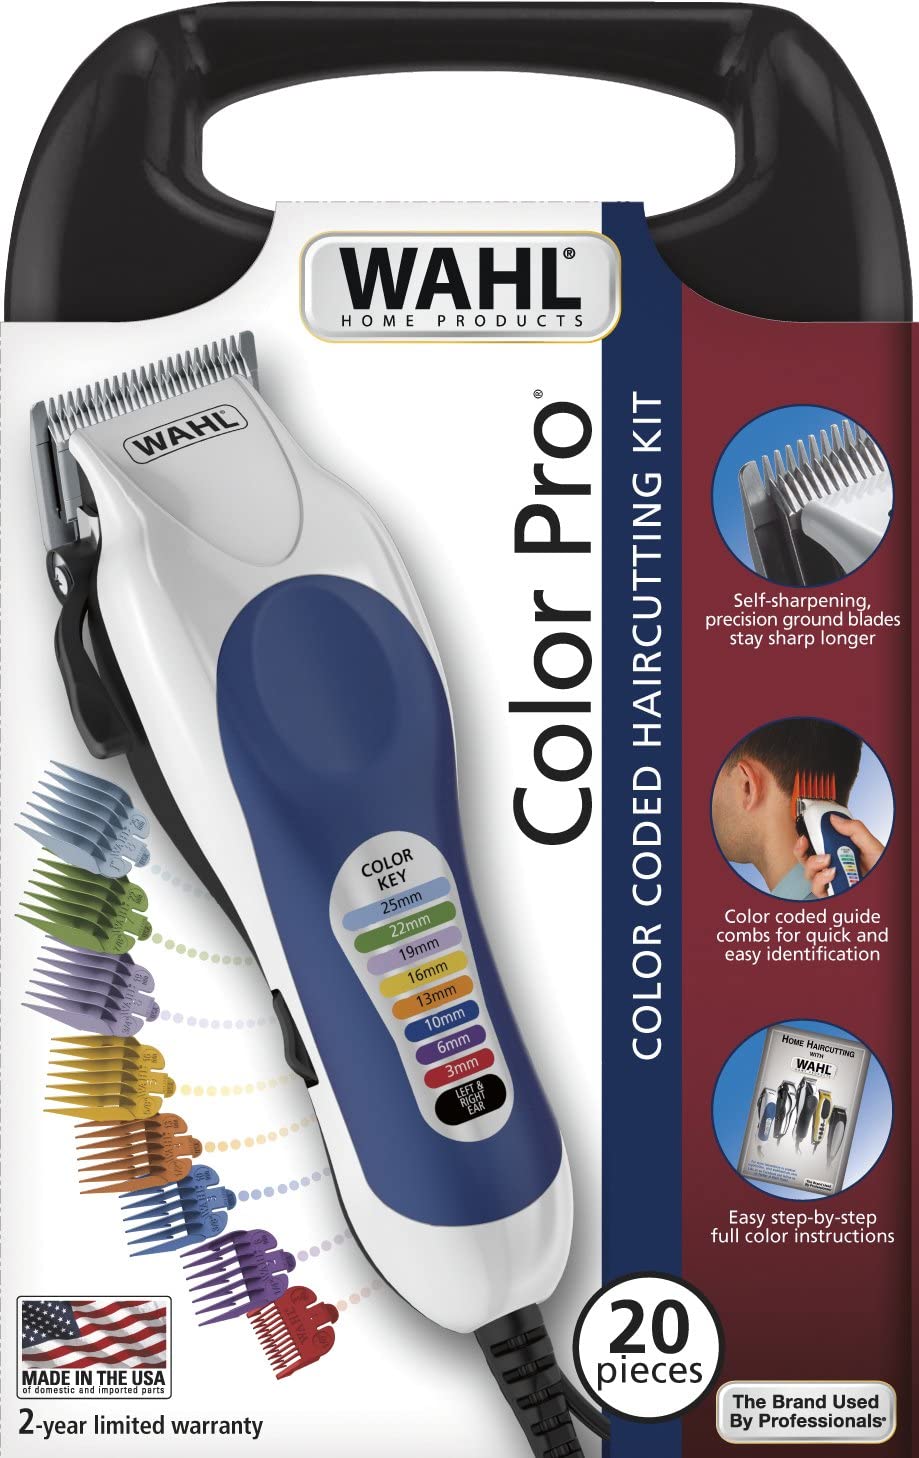 Wahl Color Pro 20 Piece Hair Cutting Kit, White 79300-1616